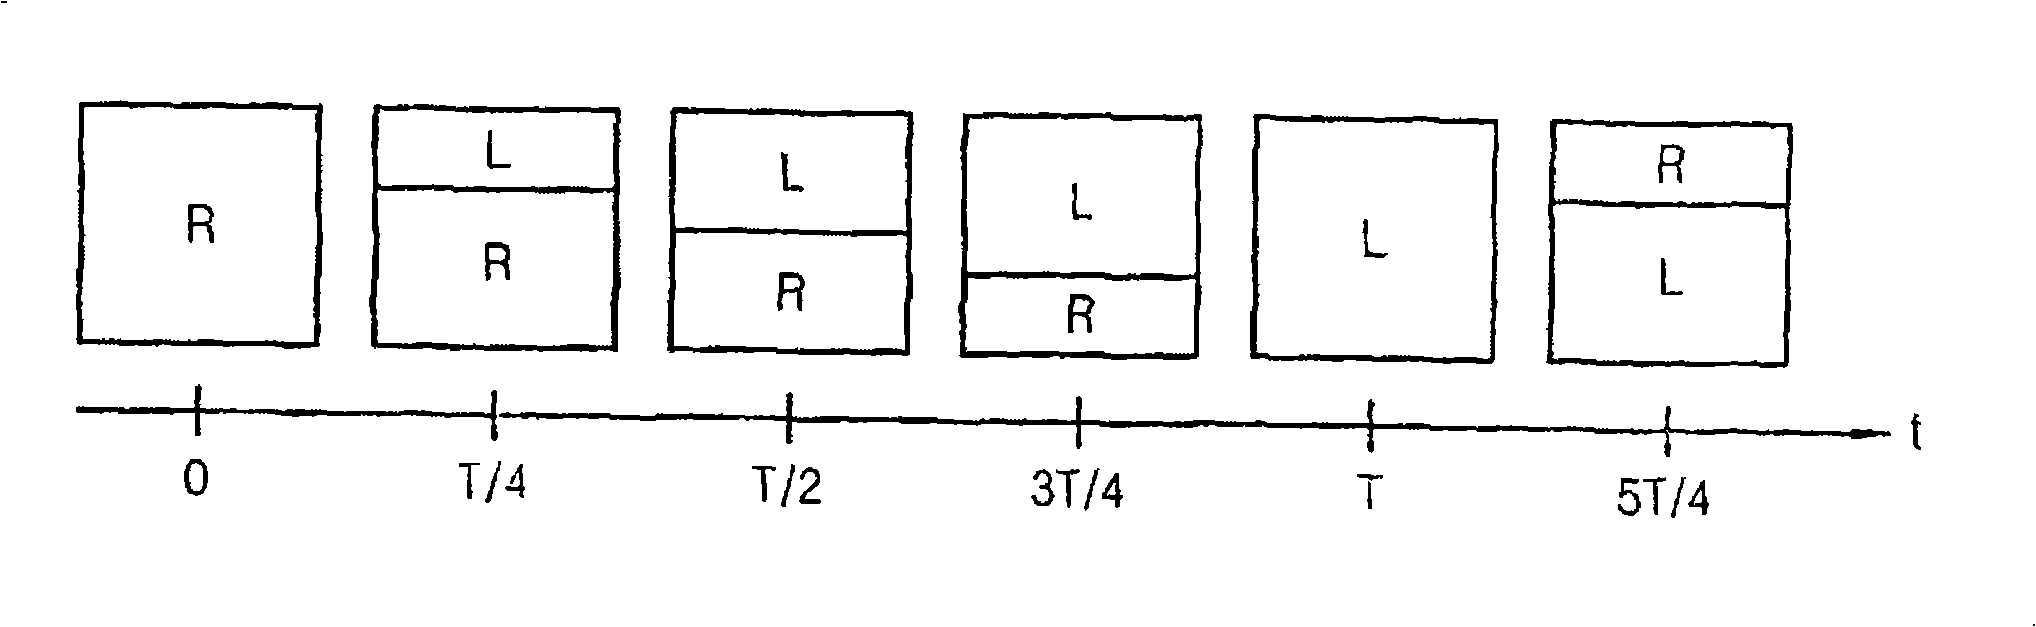 High resolution autostereoscopic display apparatus with interlaced image